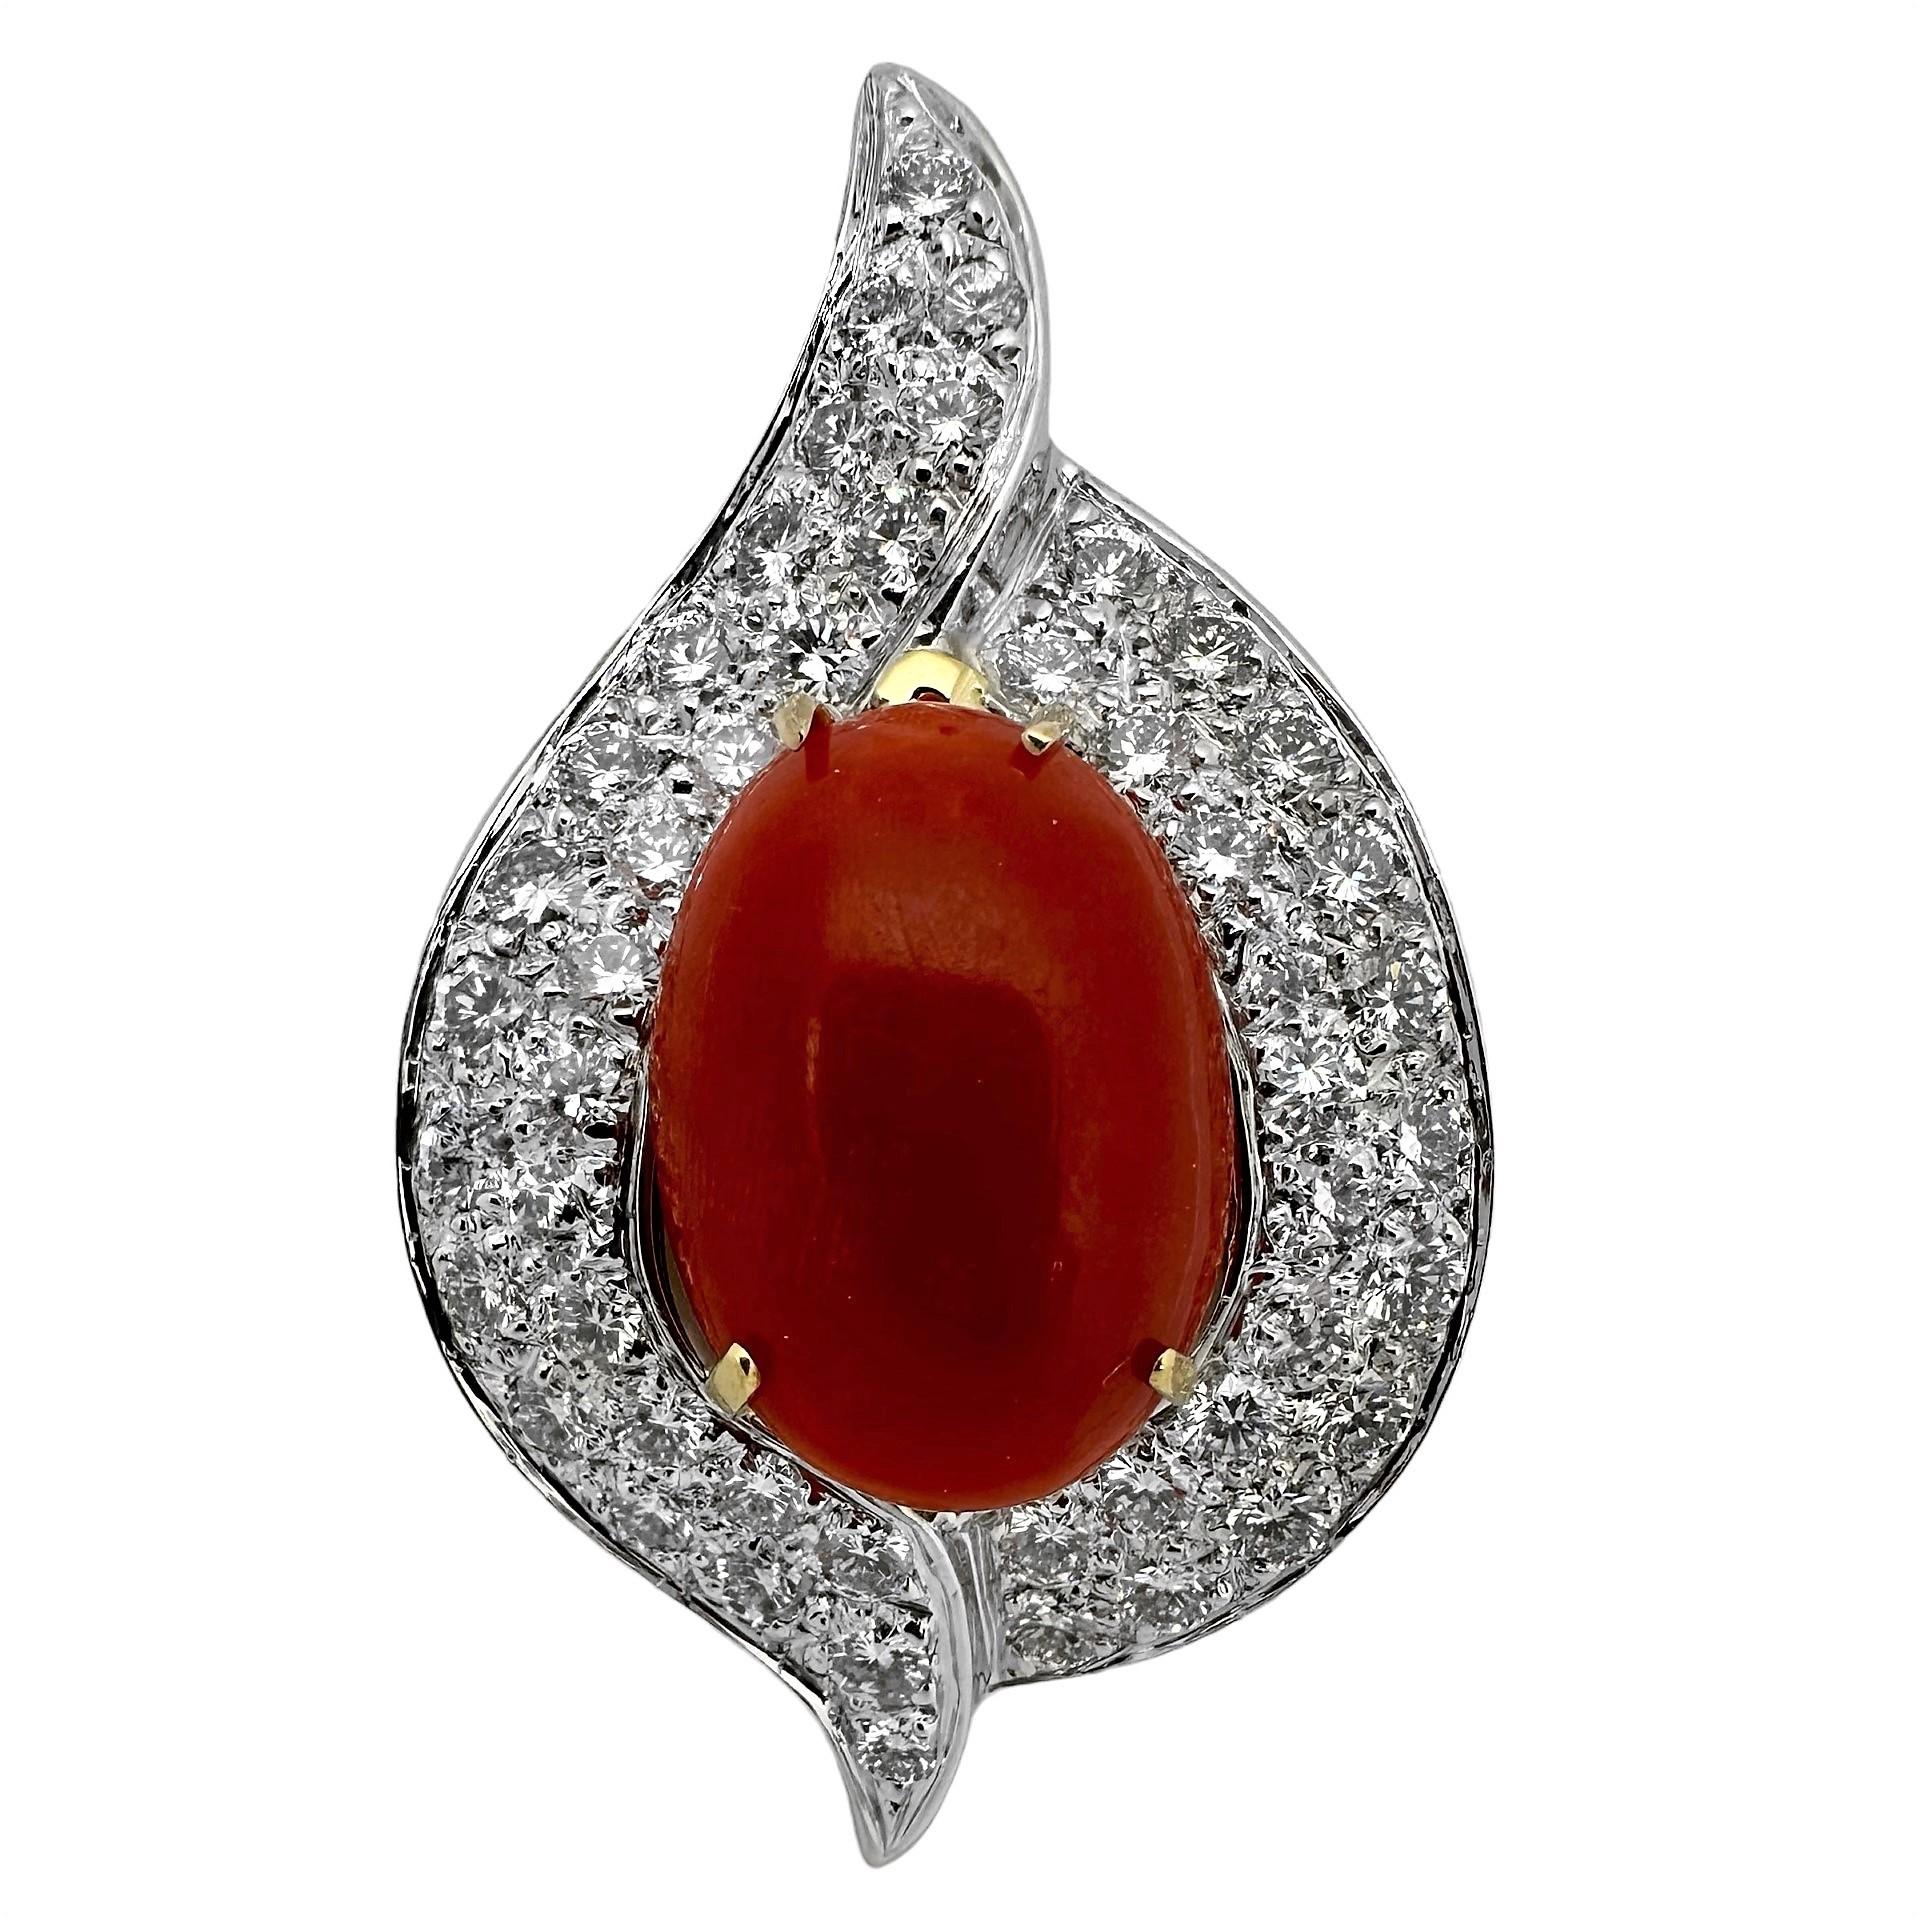 This very dramatic vintage pendant by designer Emis Beros, is expertly crafted in 18k white gold. The oval vivid orange coral cabochon in the center is set in a yellow gold basket which measures almost 3/4 inch by 1/2 inch. This very fine quality